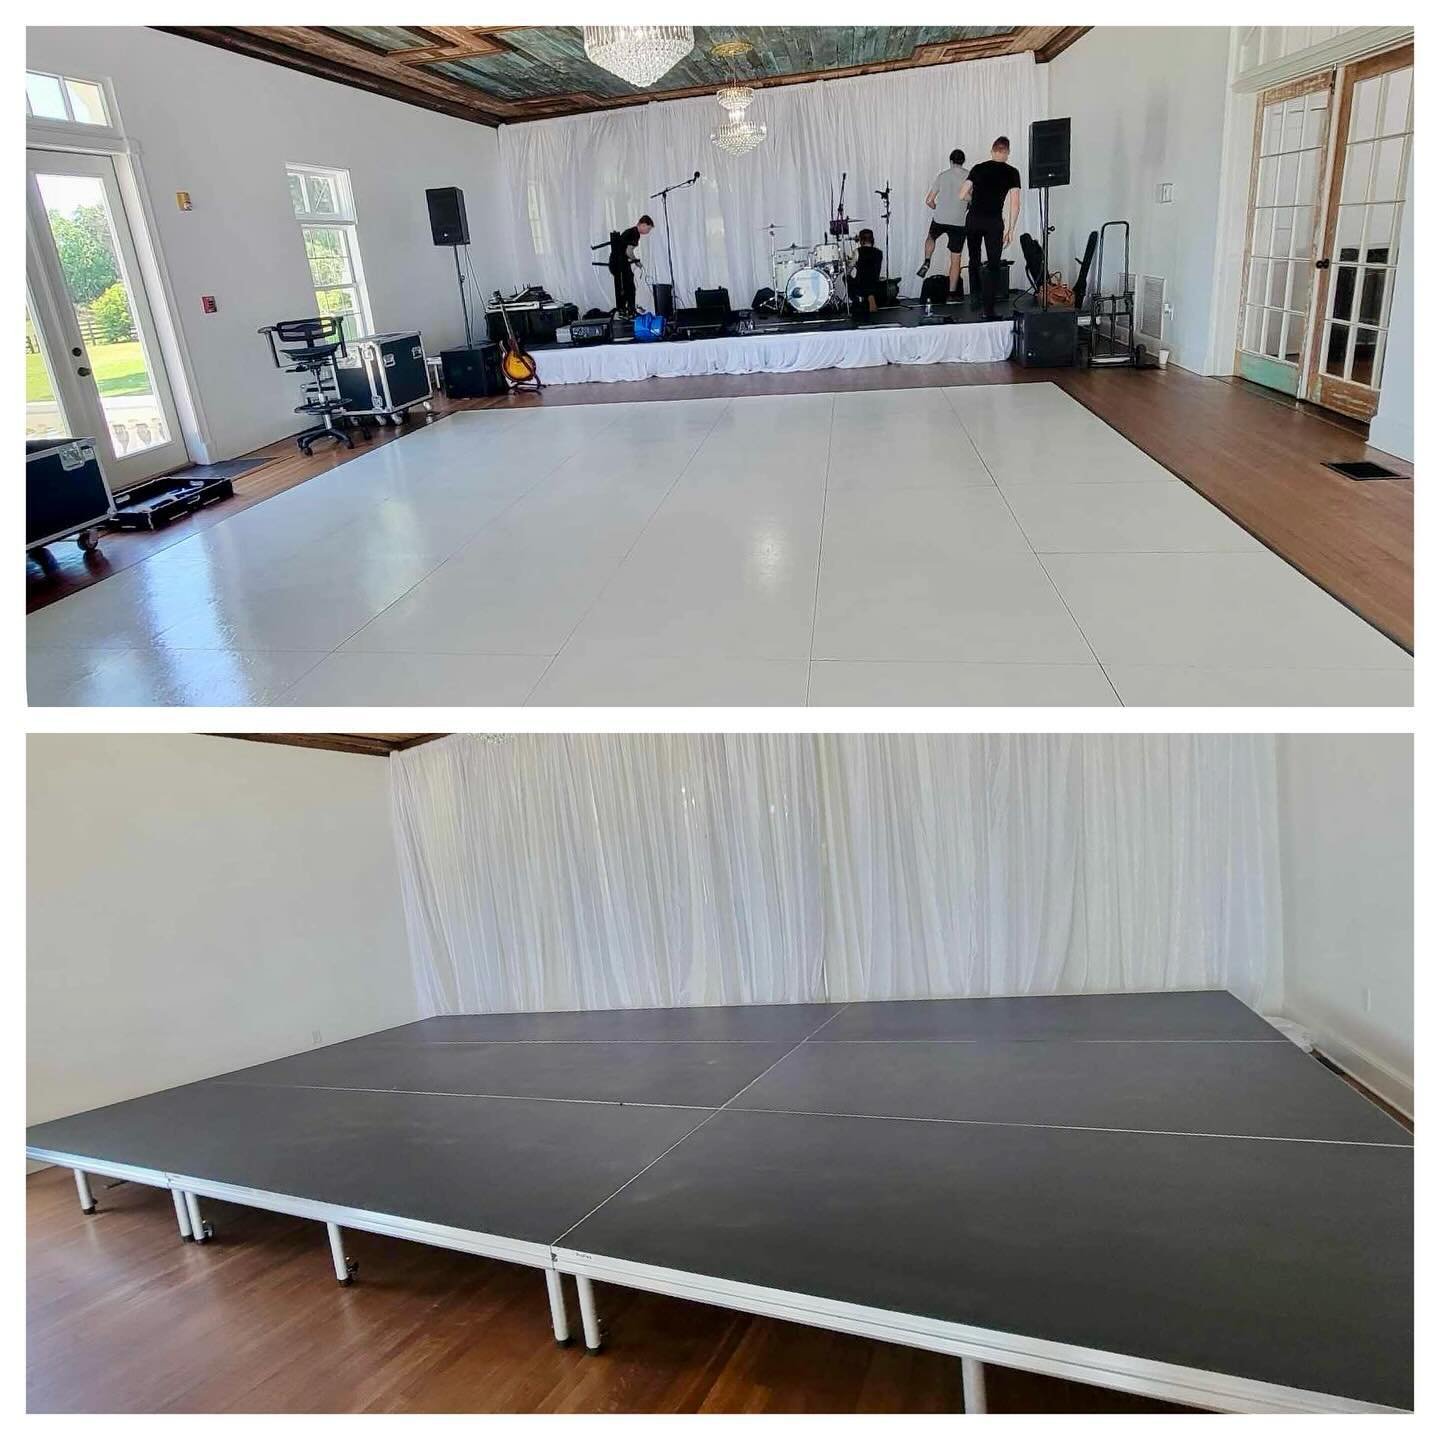 At Bella Cosa proving the 12x24 Stage, White Dance Floor, &amp; Draped Backdrop. Pleasure working with Across The Bay Rentals! &mdash;&mdash;&mdash;&mdash;&mdash;&mdash;&mdash;&mdash;&mdash;&mdash;&mdash;&mdash;&mdash;&mdash;&mdash;&mdash;&mdash;&mda